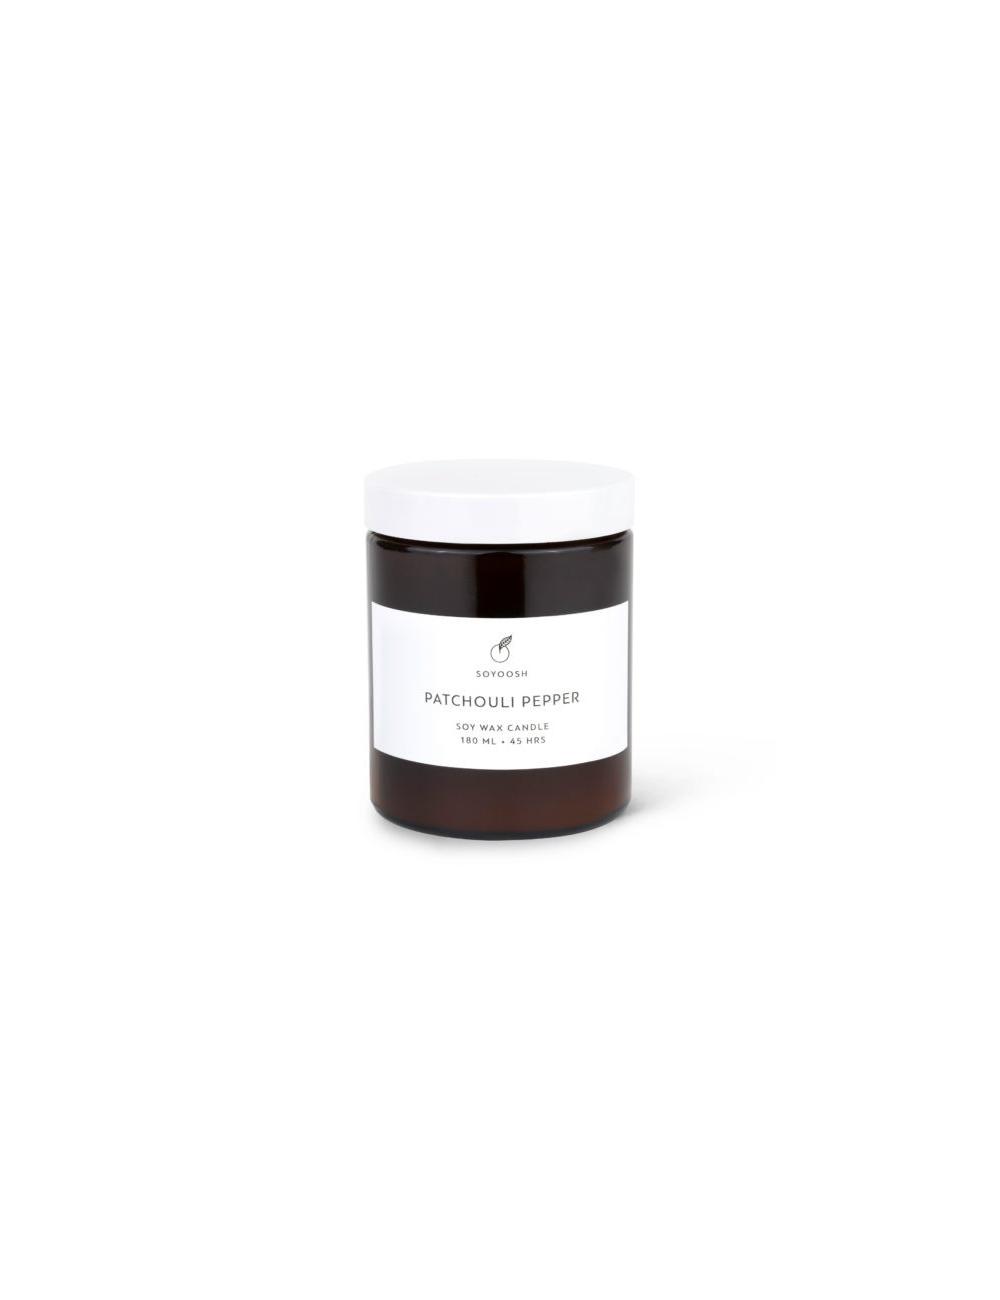 Essential oil + soy wax candle 180 | Patchouli Pepper